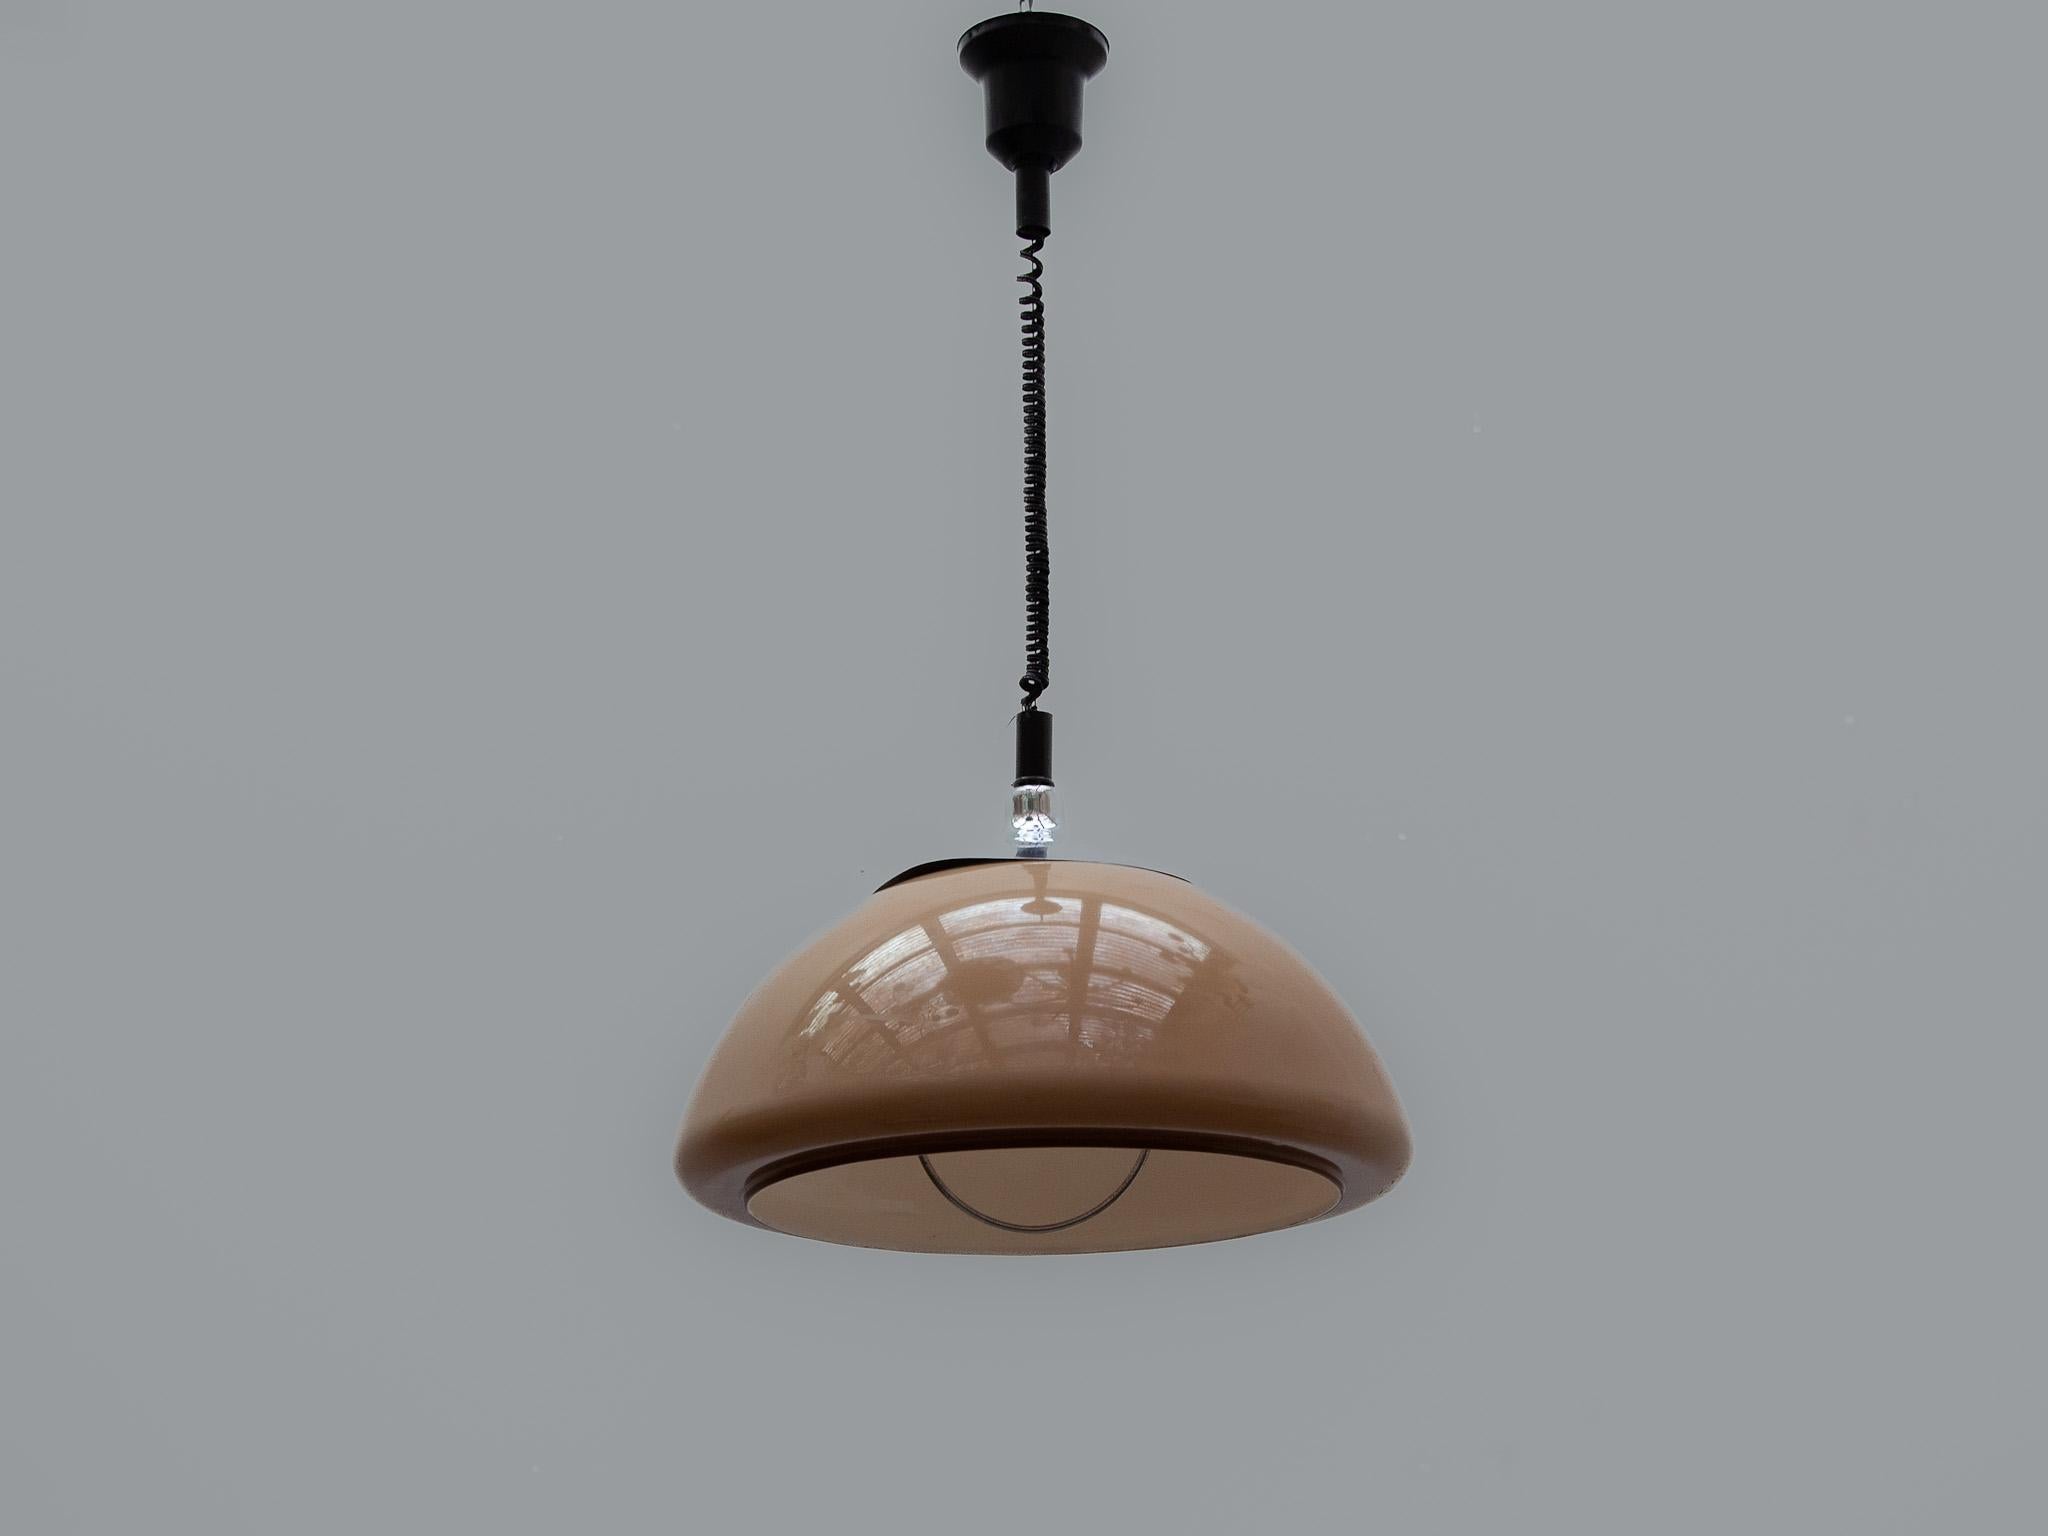 Harvey Guzzini chandelier in caramel/brown coloring, with an acrylic dome shape and original black acrylic canopy. The underside of the dome with chrome surround. Emits a beautiful warm light. Great statement piece and highly indicative of the